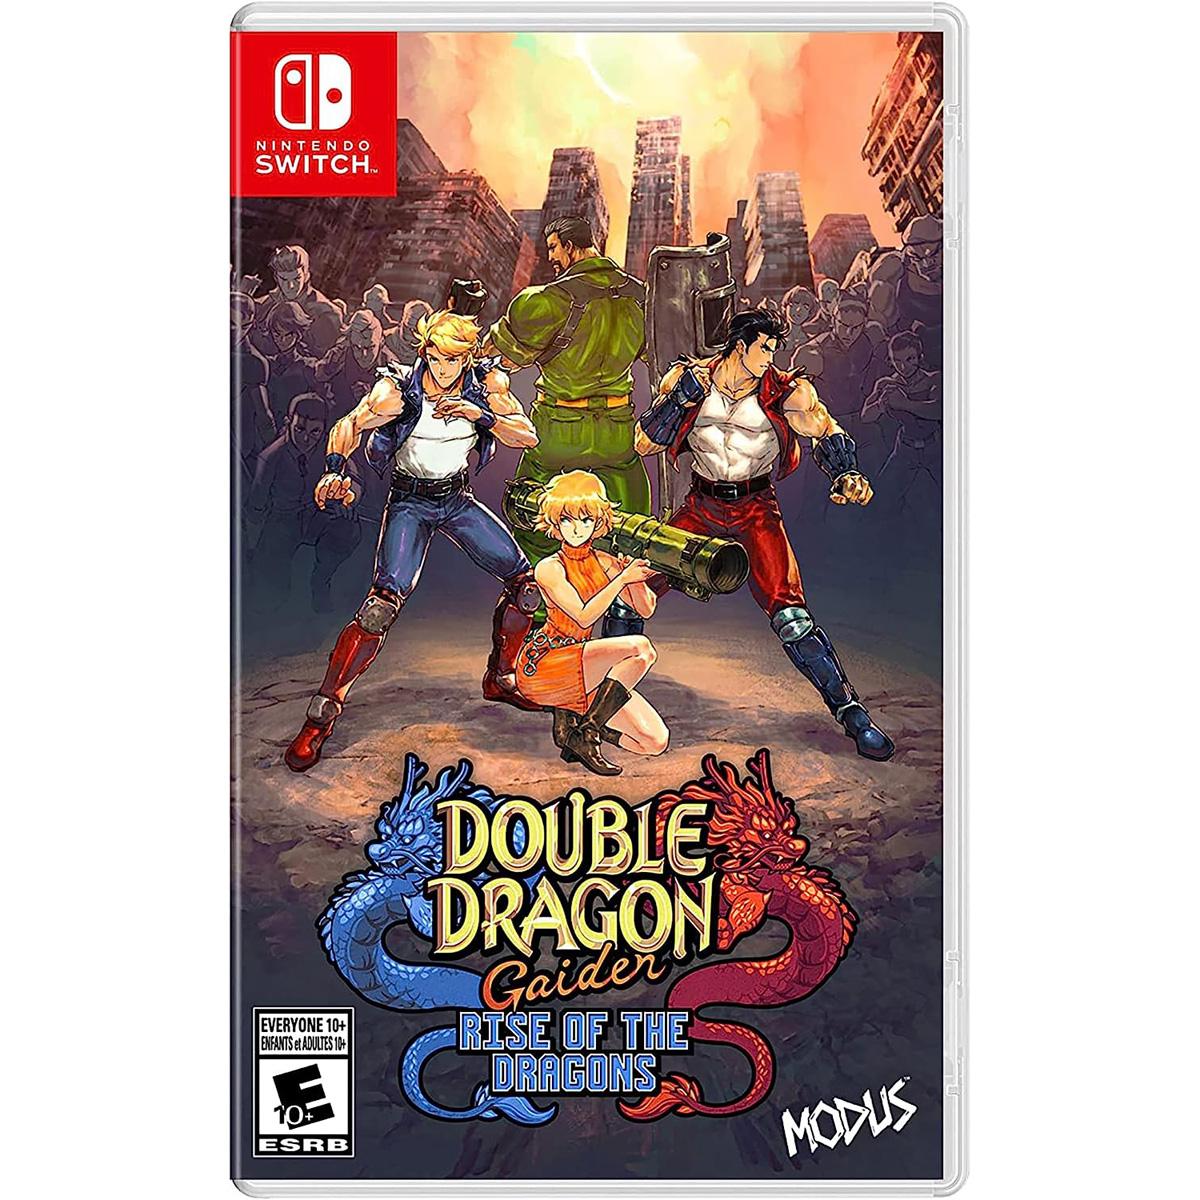 Double Dragon Gaiden Rise of the Dragons Nintendo Switch for $14.99